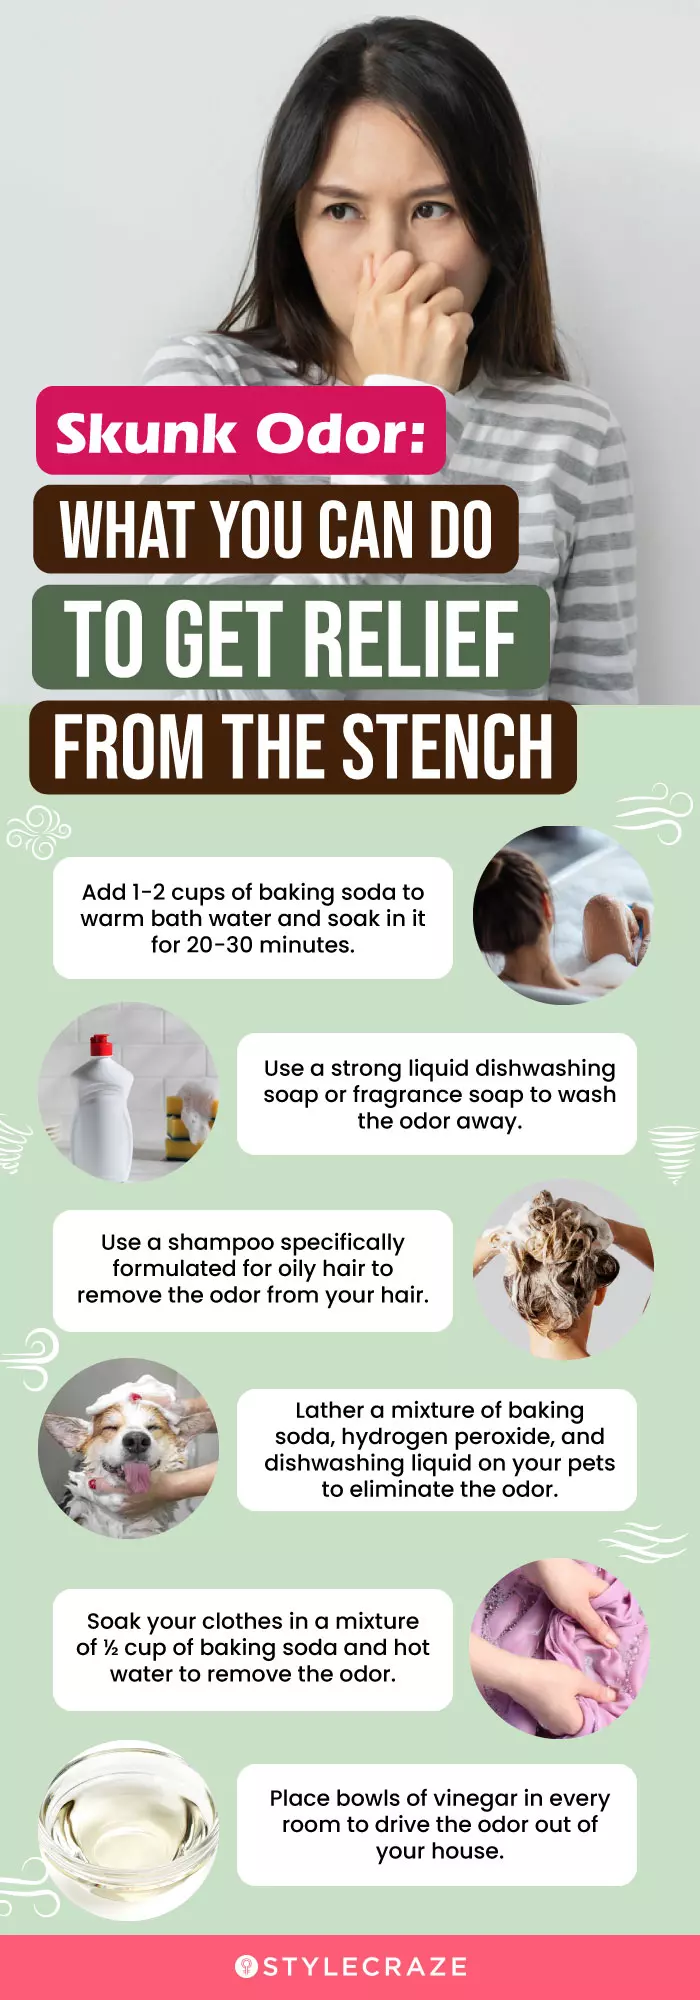 skunk odor what you can do to get relief from the stench (infographic)